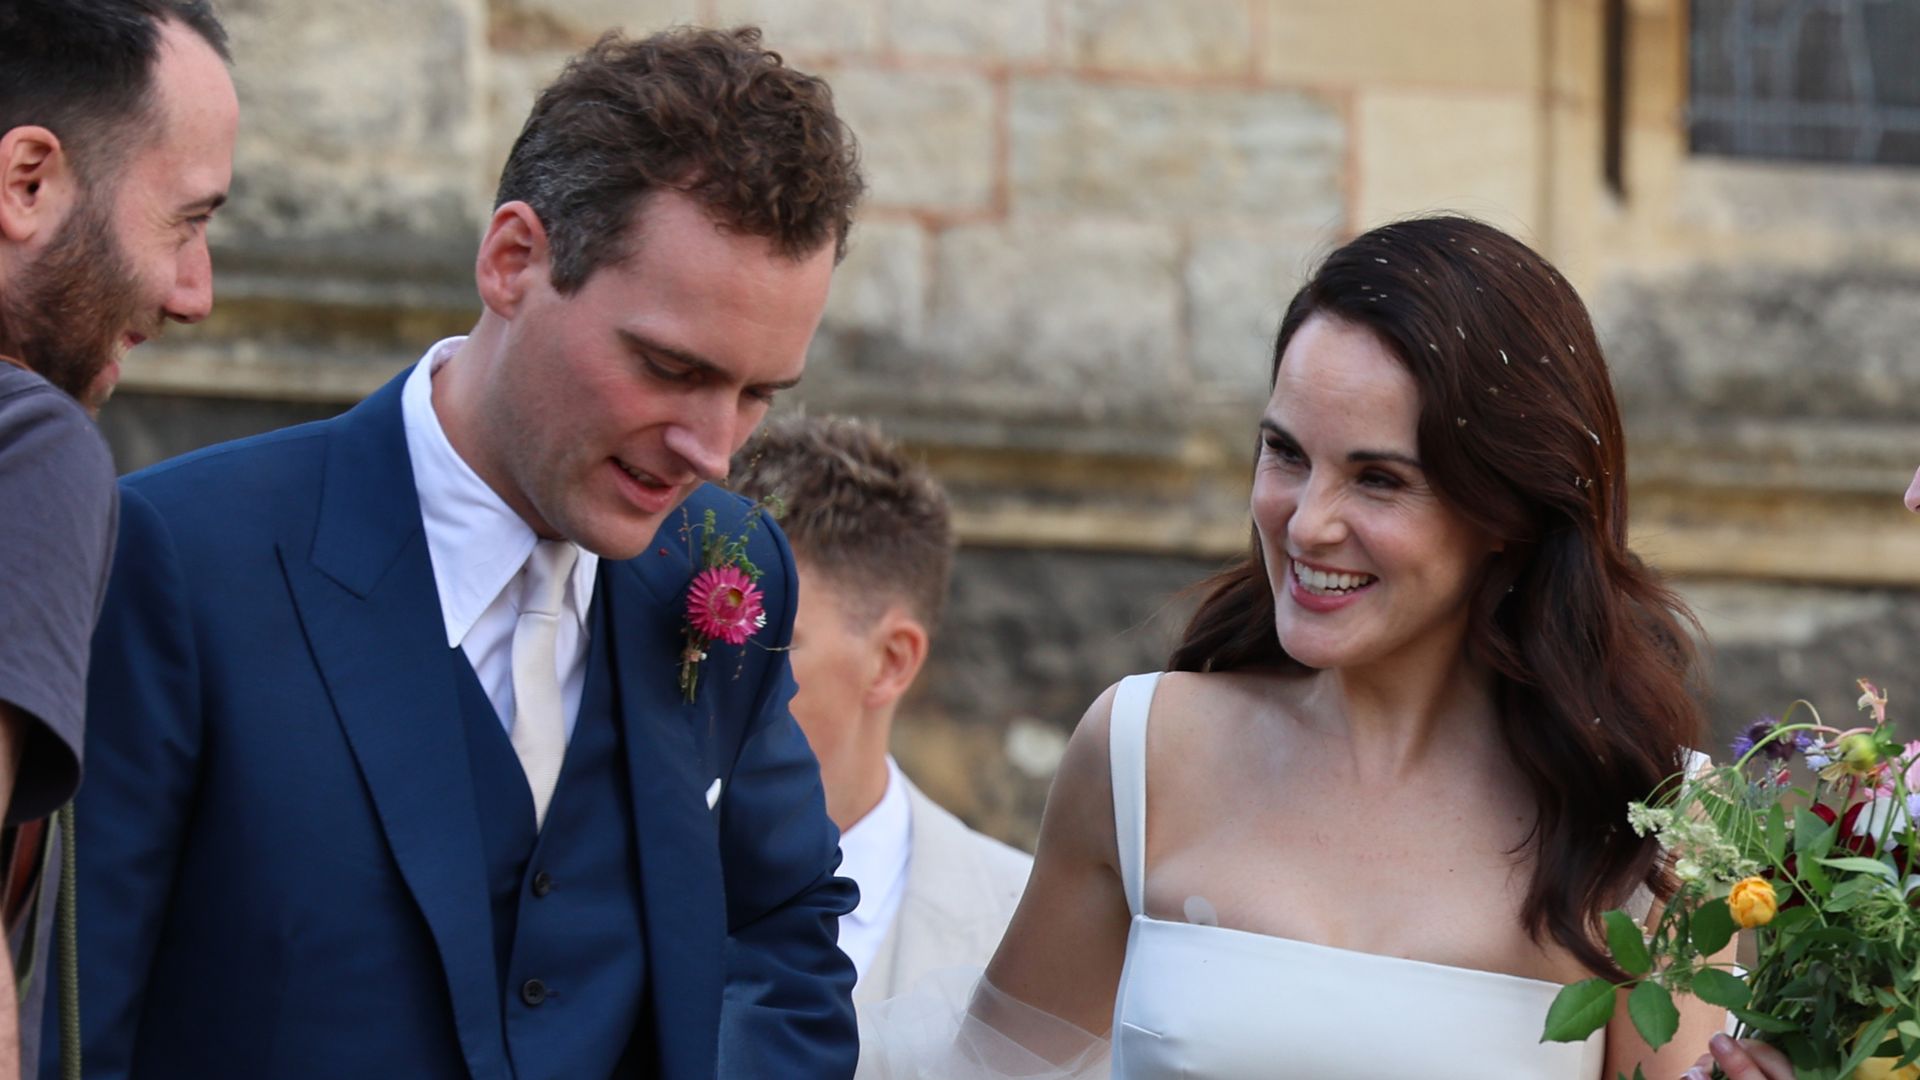 Downton Abbey star Michelle Dockery stuns in satin white gown as she marries Jasper Waller-Bridge in front of glittering crowd - photos